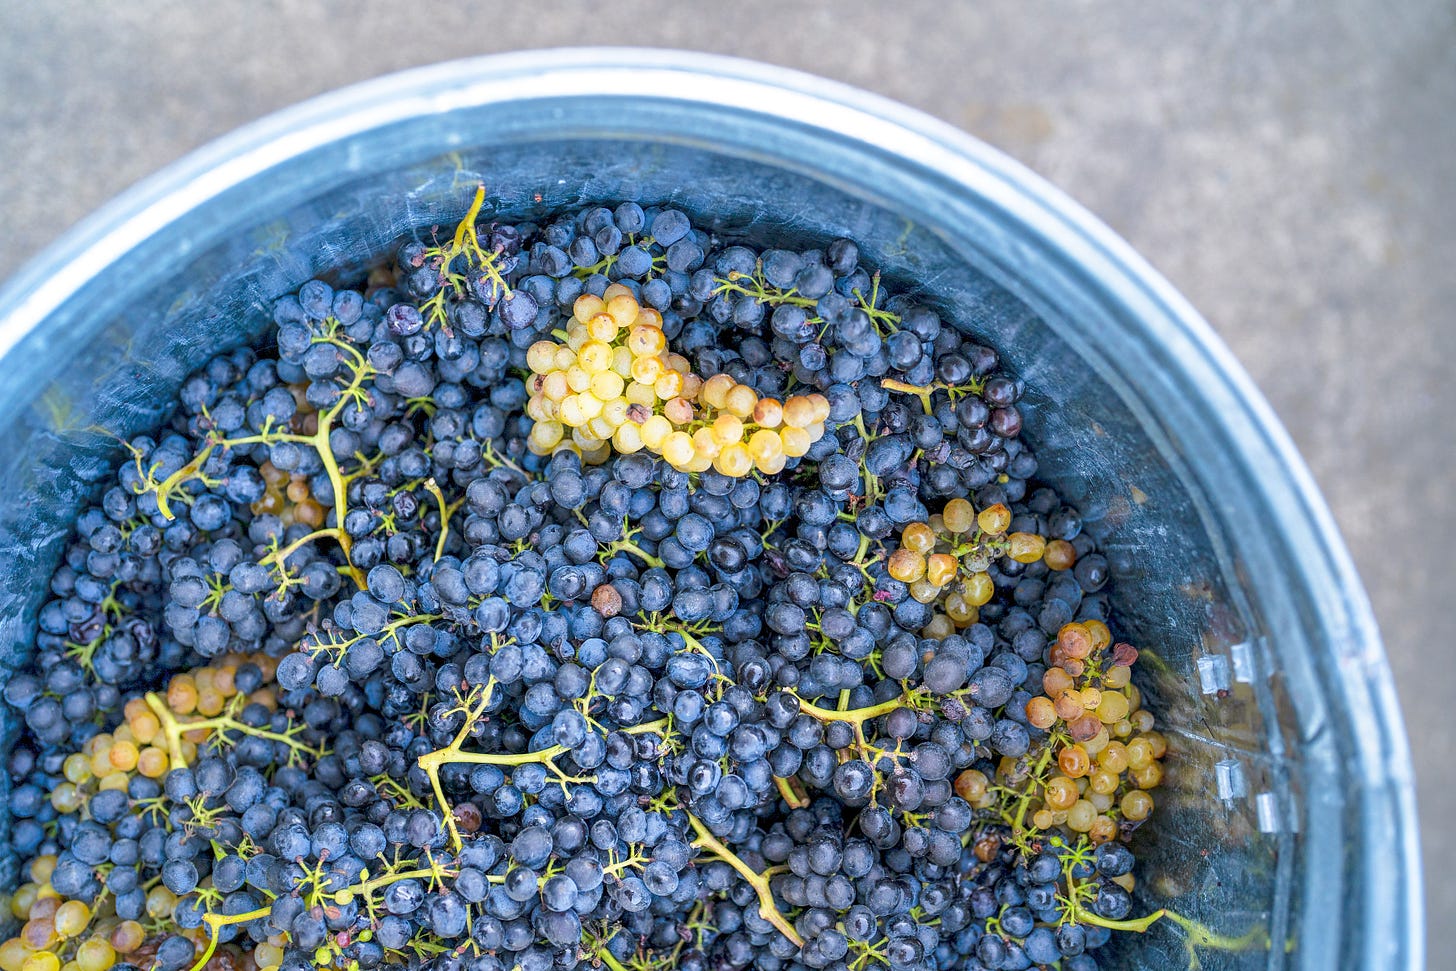 Bowl of freshly picked grapes from the vine.